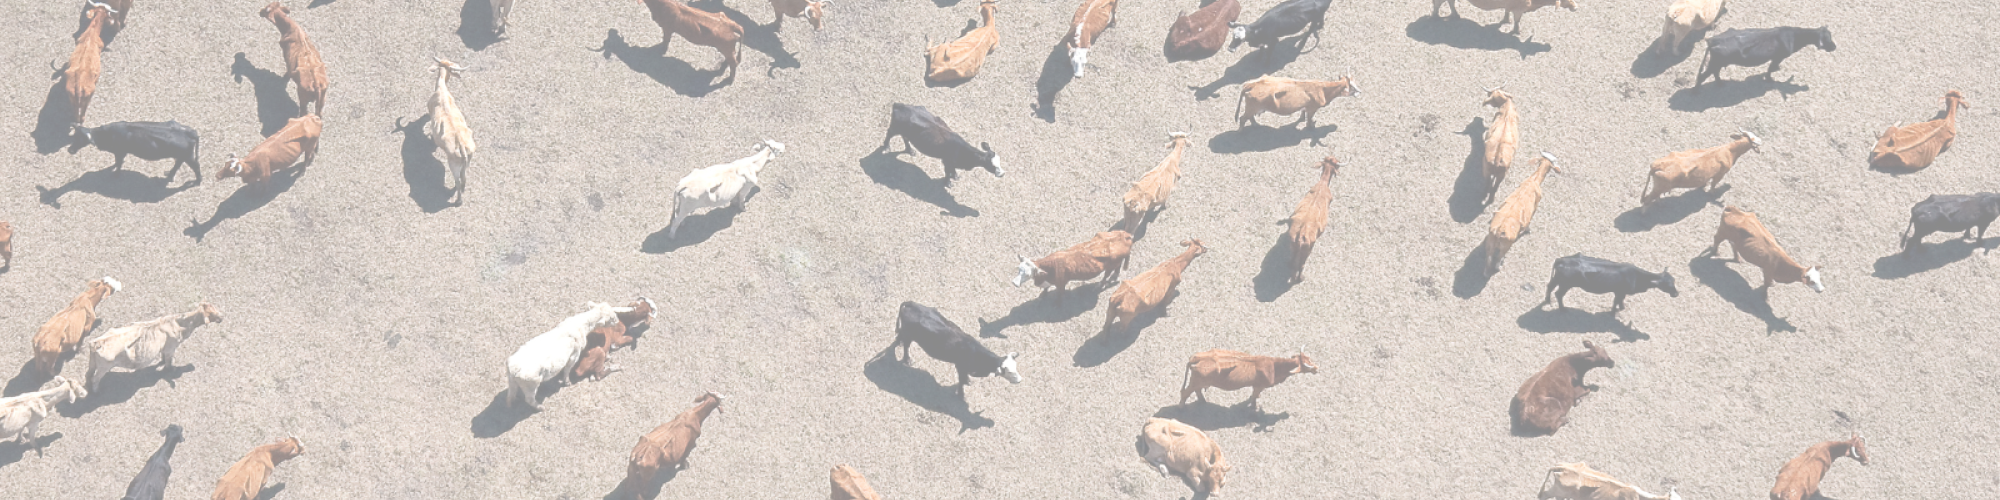 An aerial photo of cattle